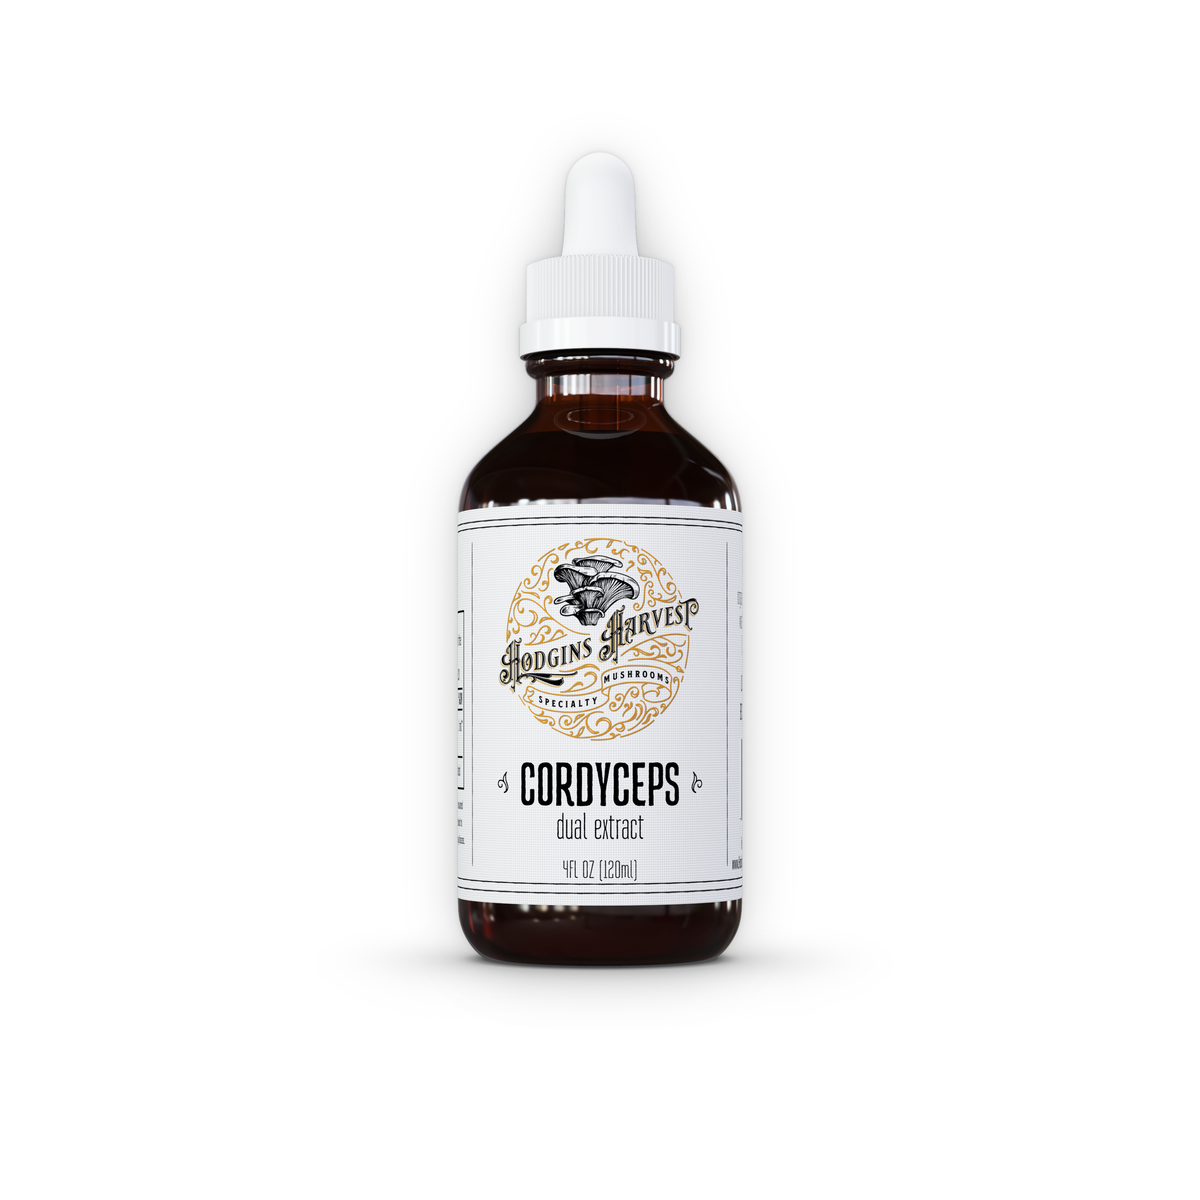 Cordyceps Dual Extract Tincture by Hodgins Harvest